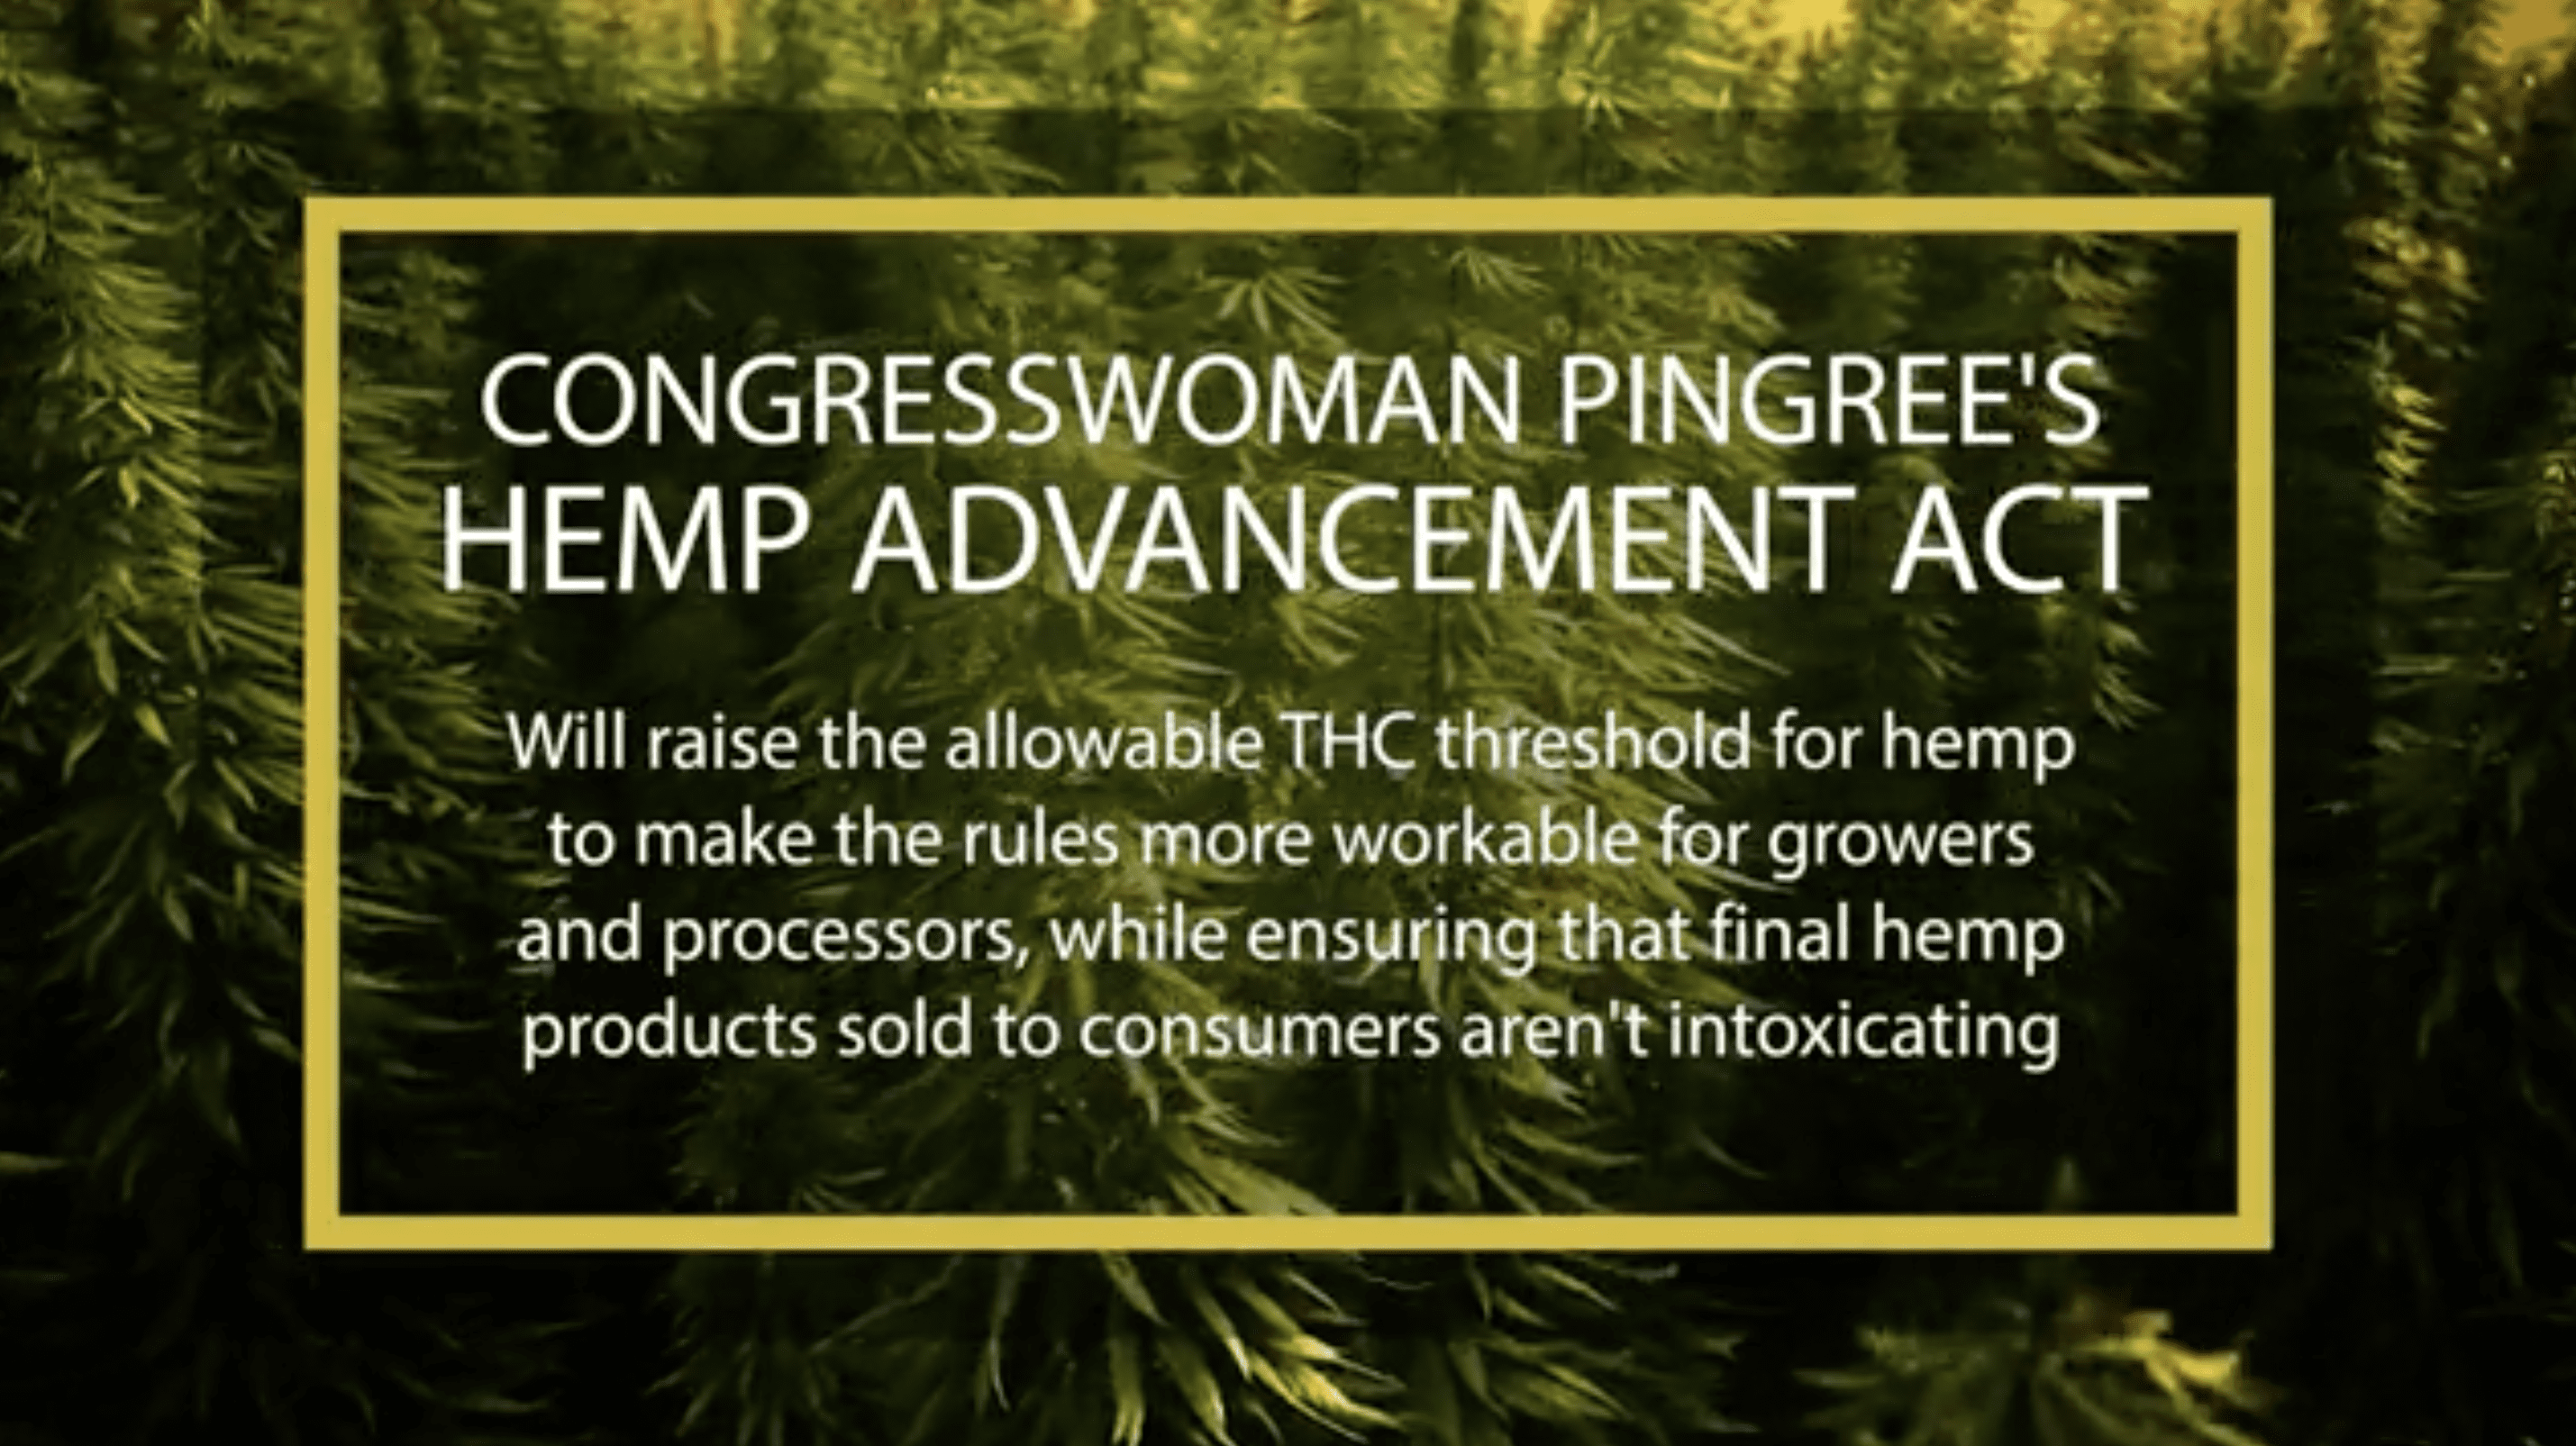 NEW! Bill Introduced To Improve US Hemp Production Rules